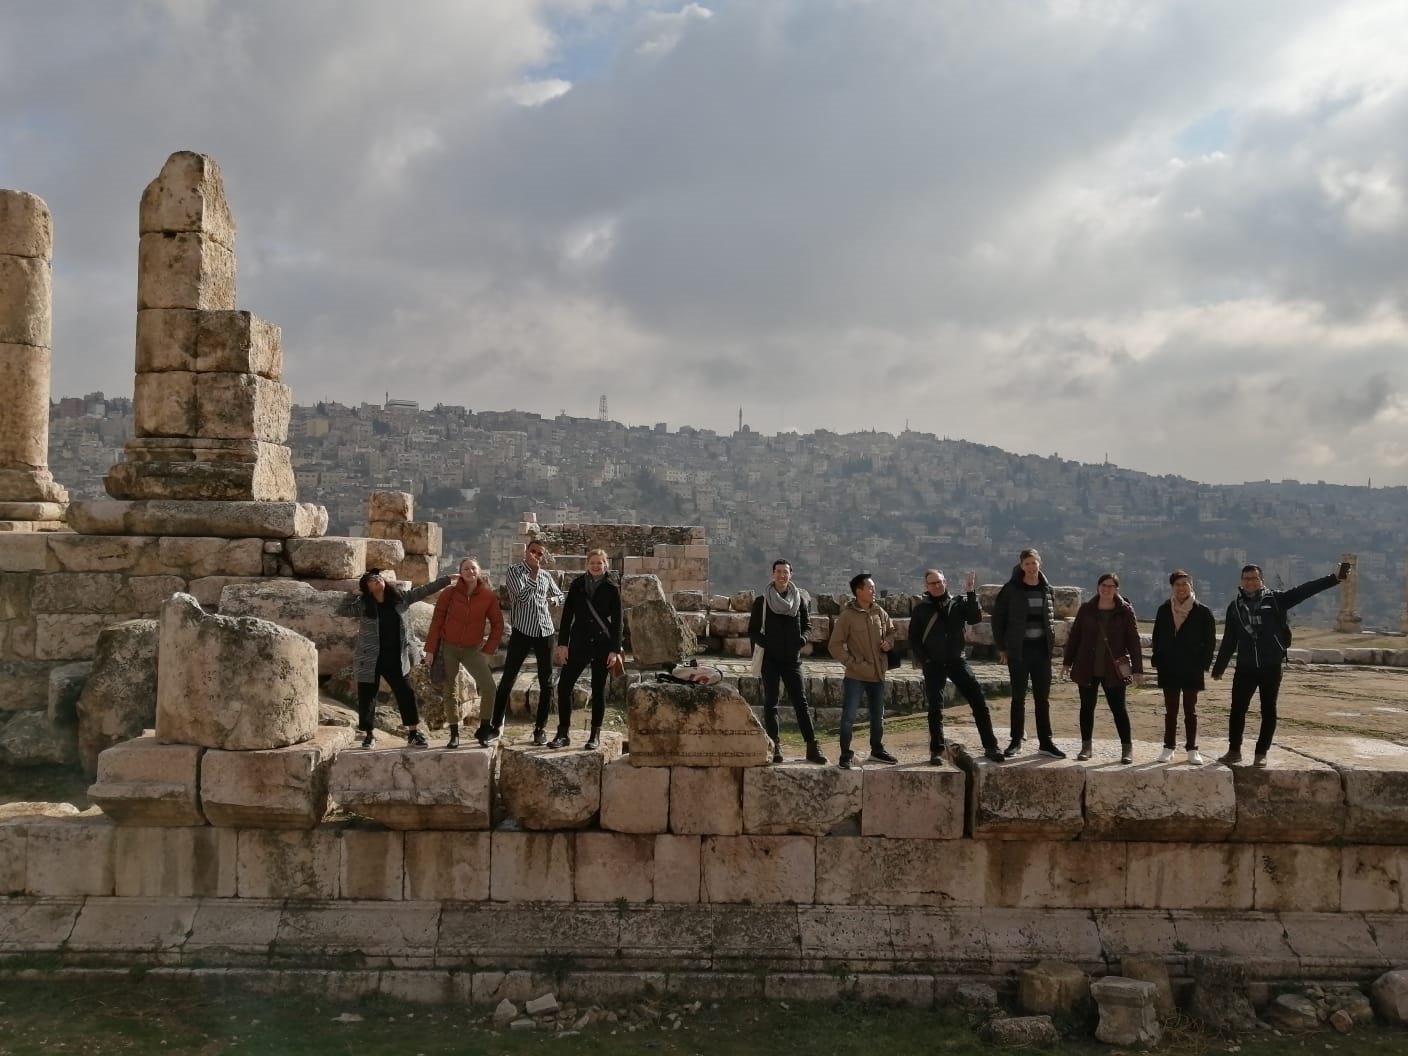 Our company held a conference in Amman, Jordan for all our people to meet from around the world and learn and team-build together. Here's a group posing at the Amman Citadel!